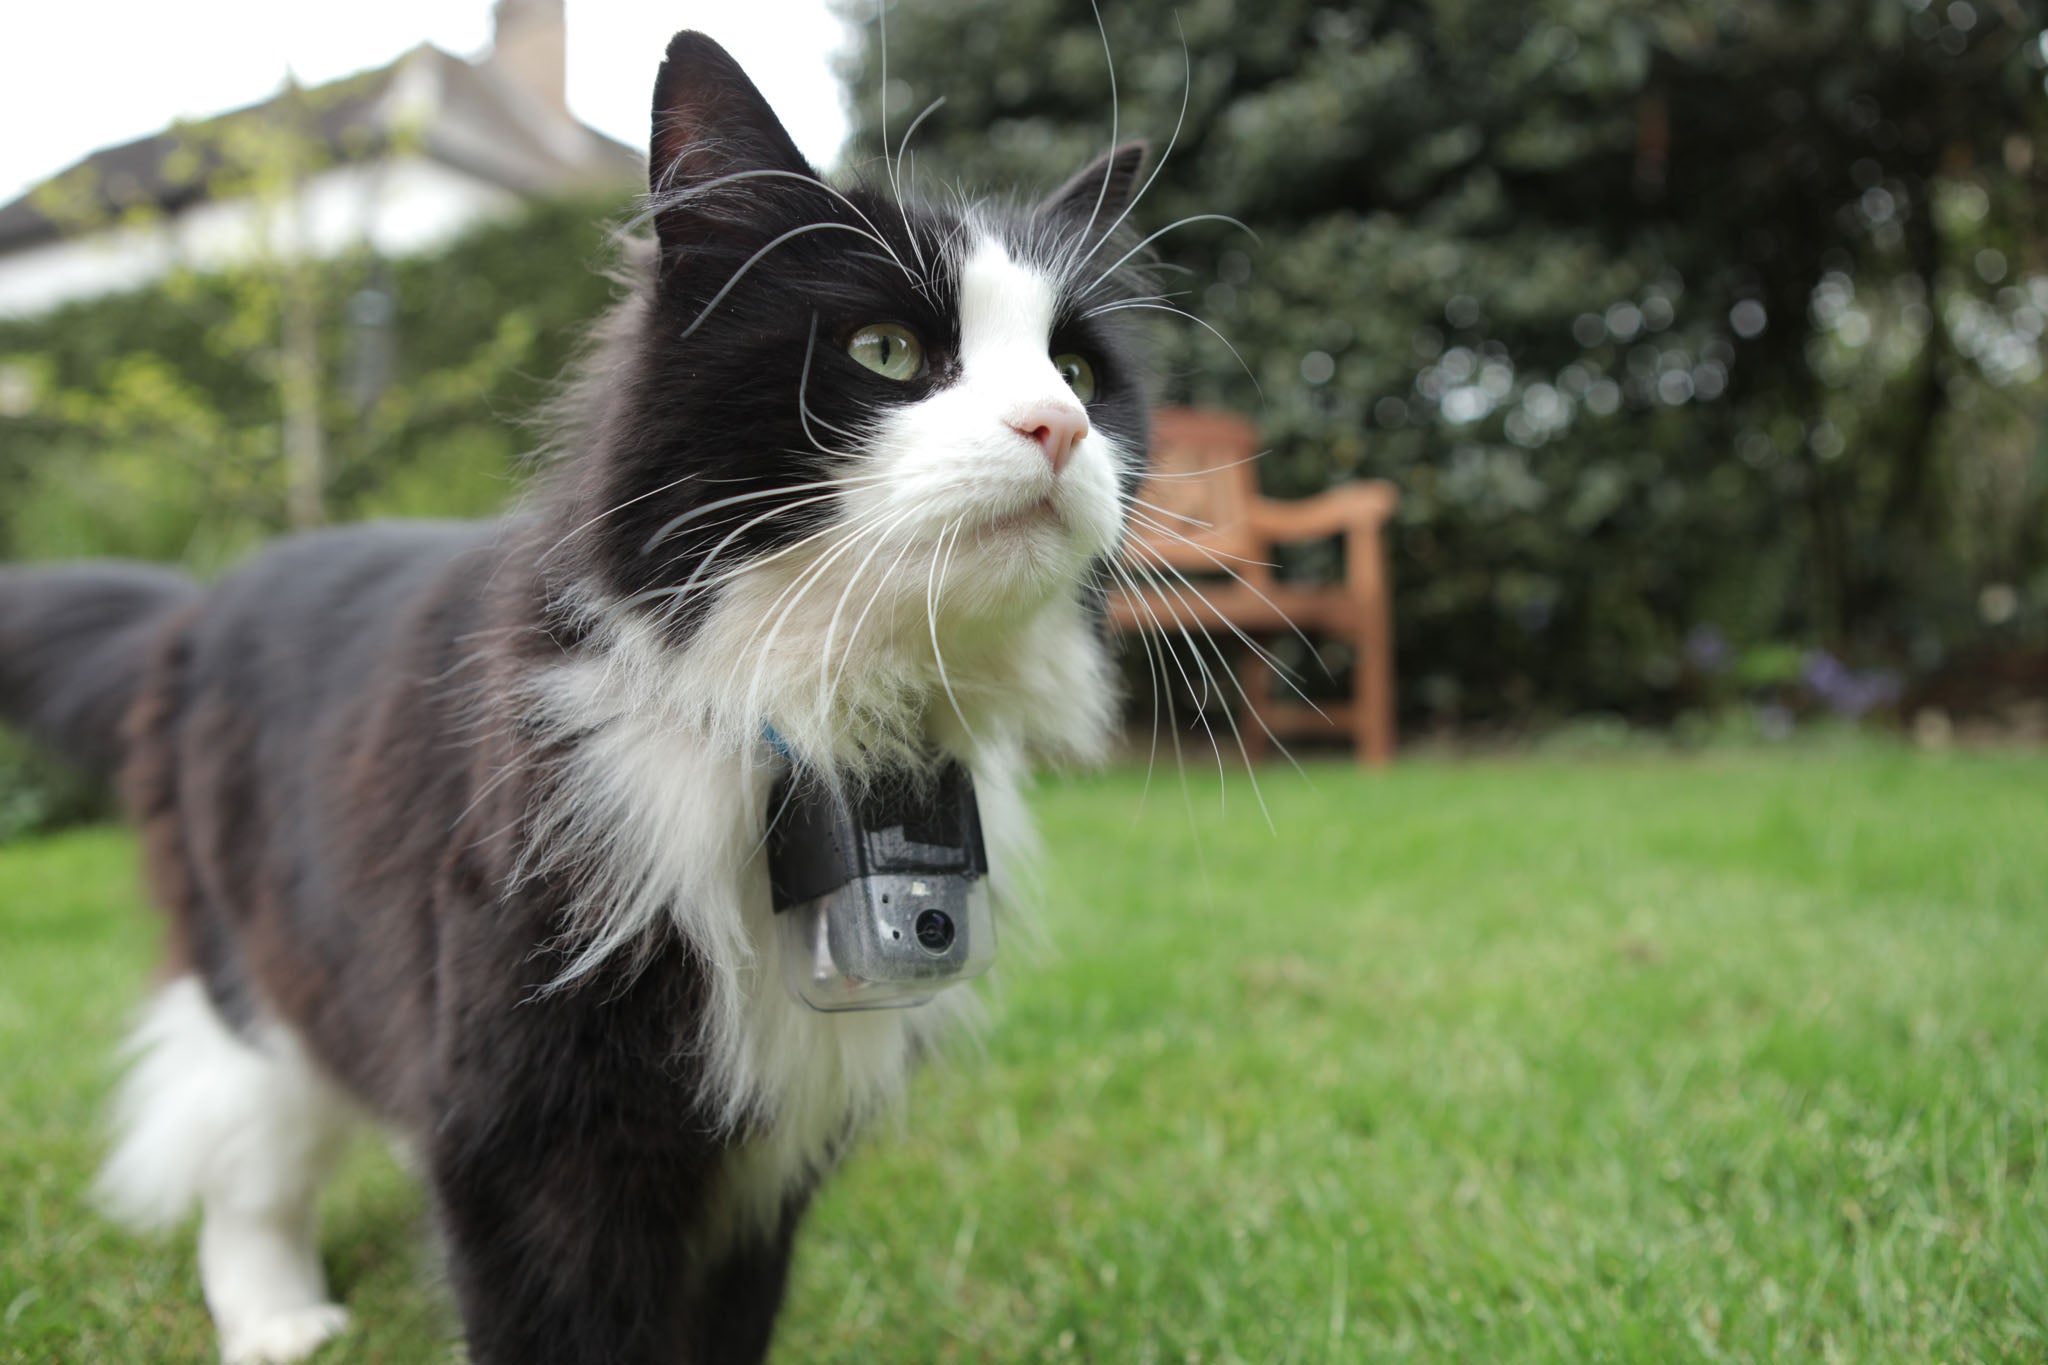 Thomas roaming in his garden with a cat-cam